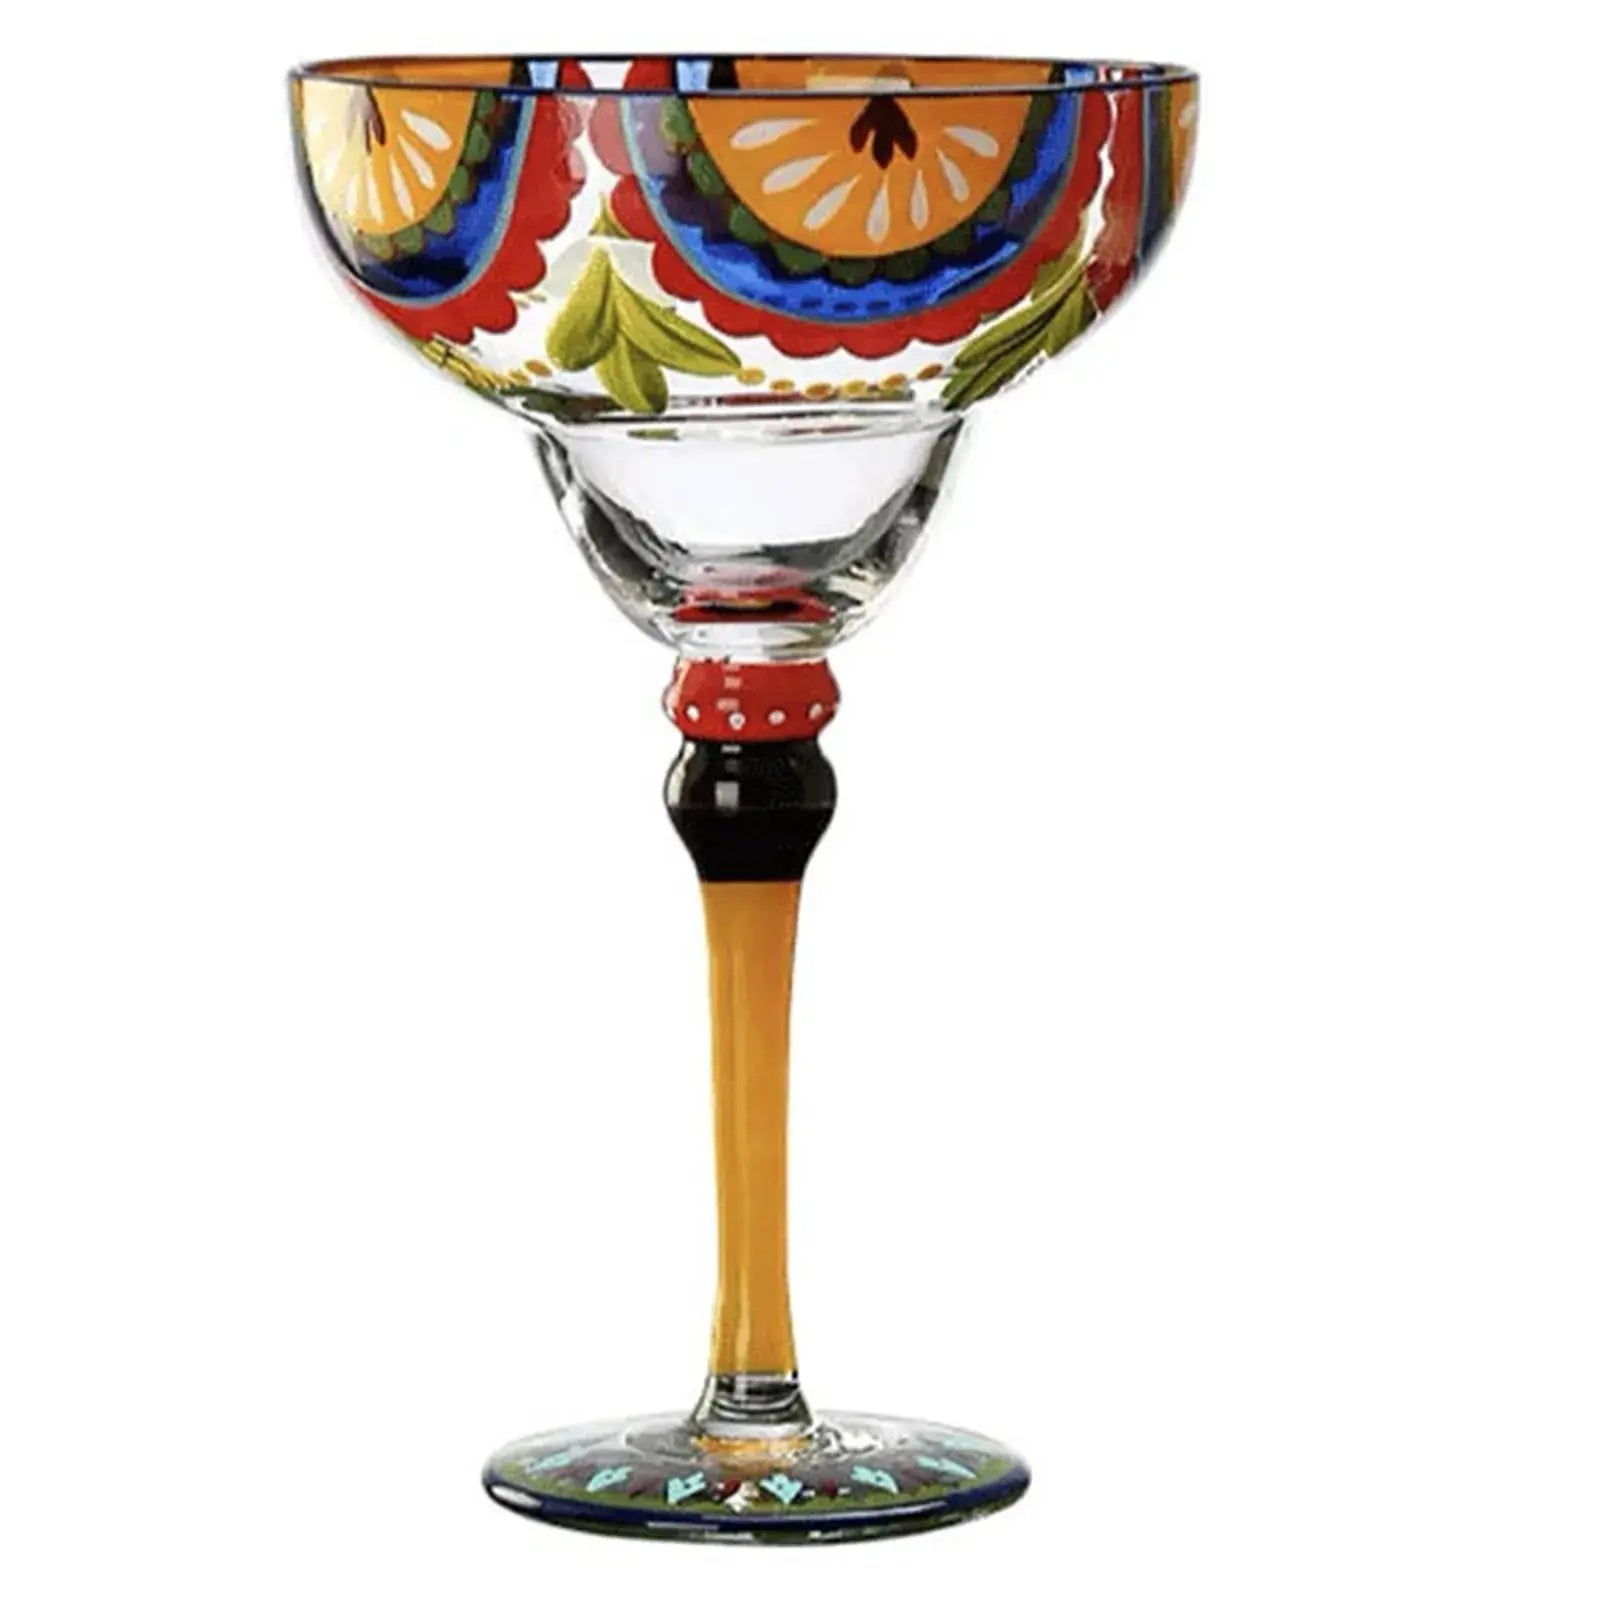 Margarita Cocktail Goblet Cup Multi-Purpose Colorful Wine Glasses for Home Bar Wedding Party Collection41